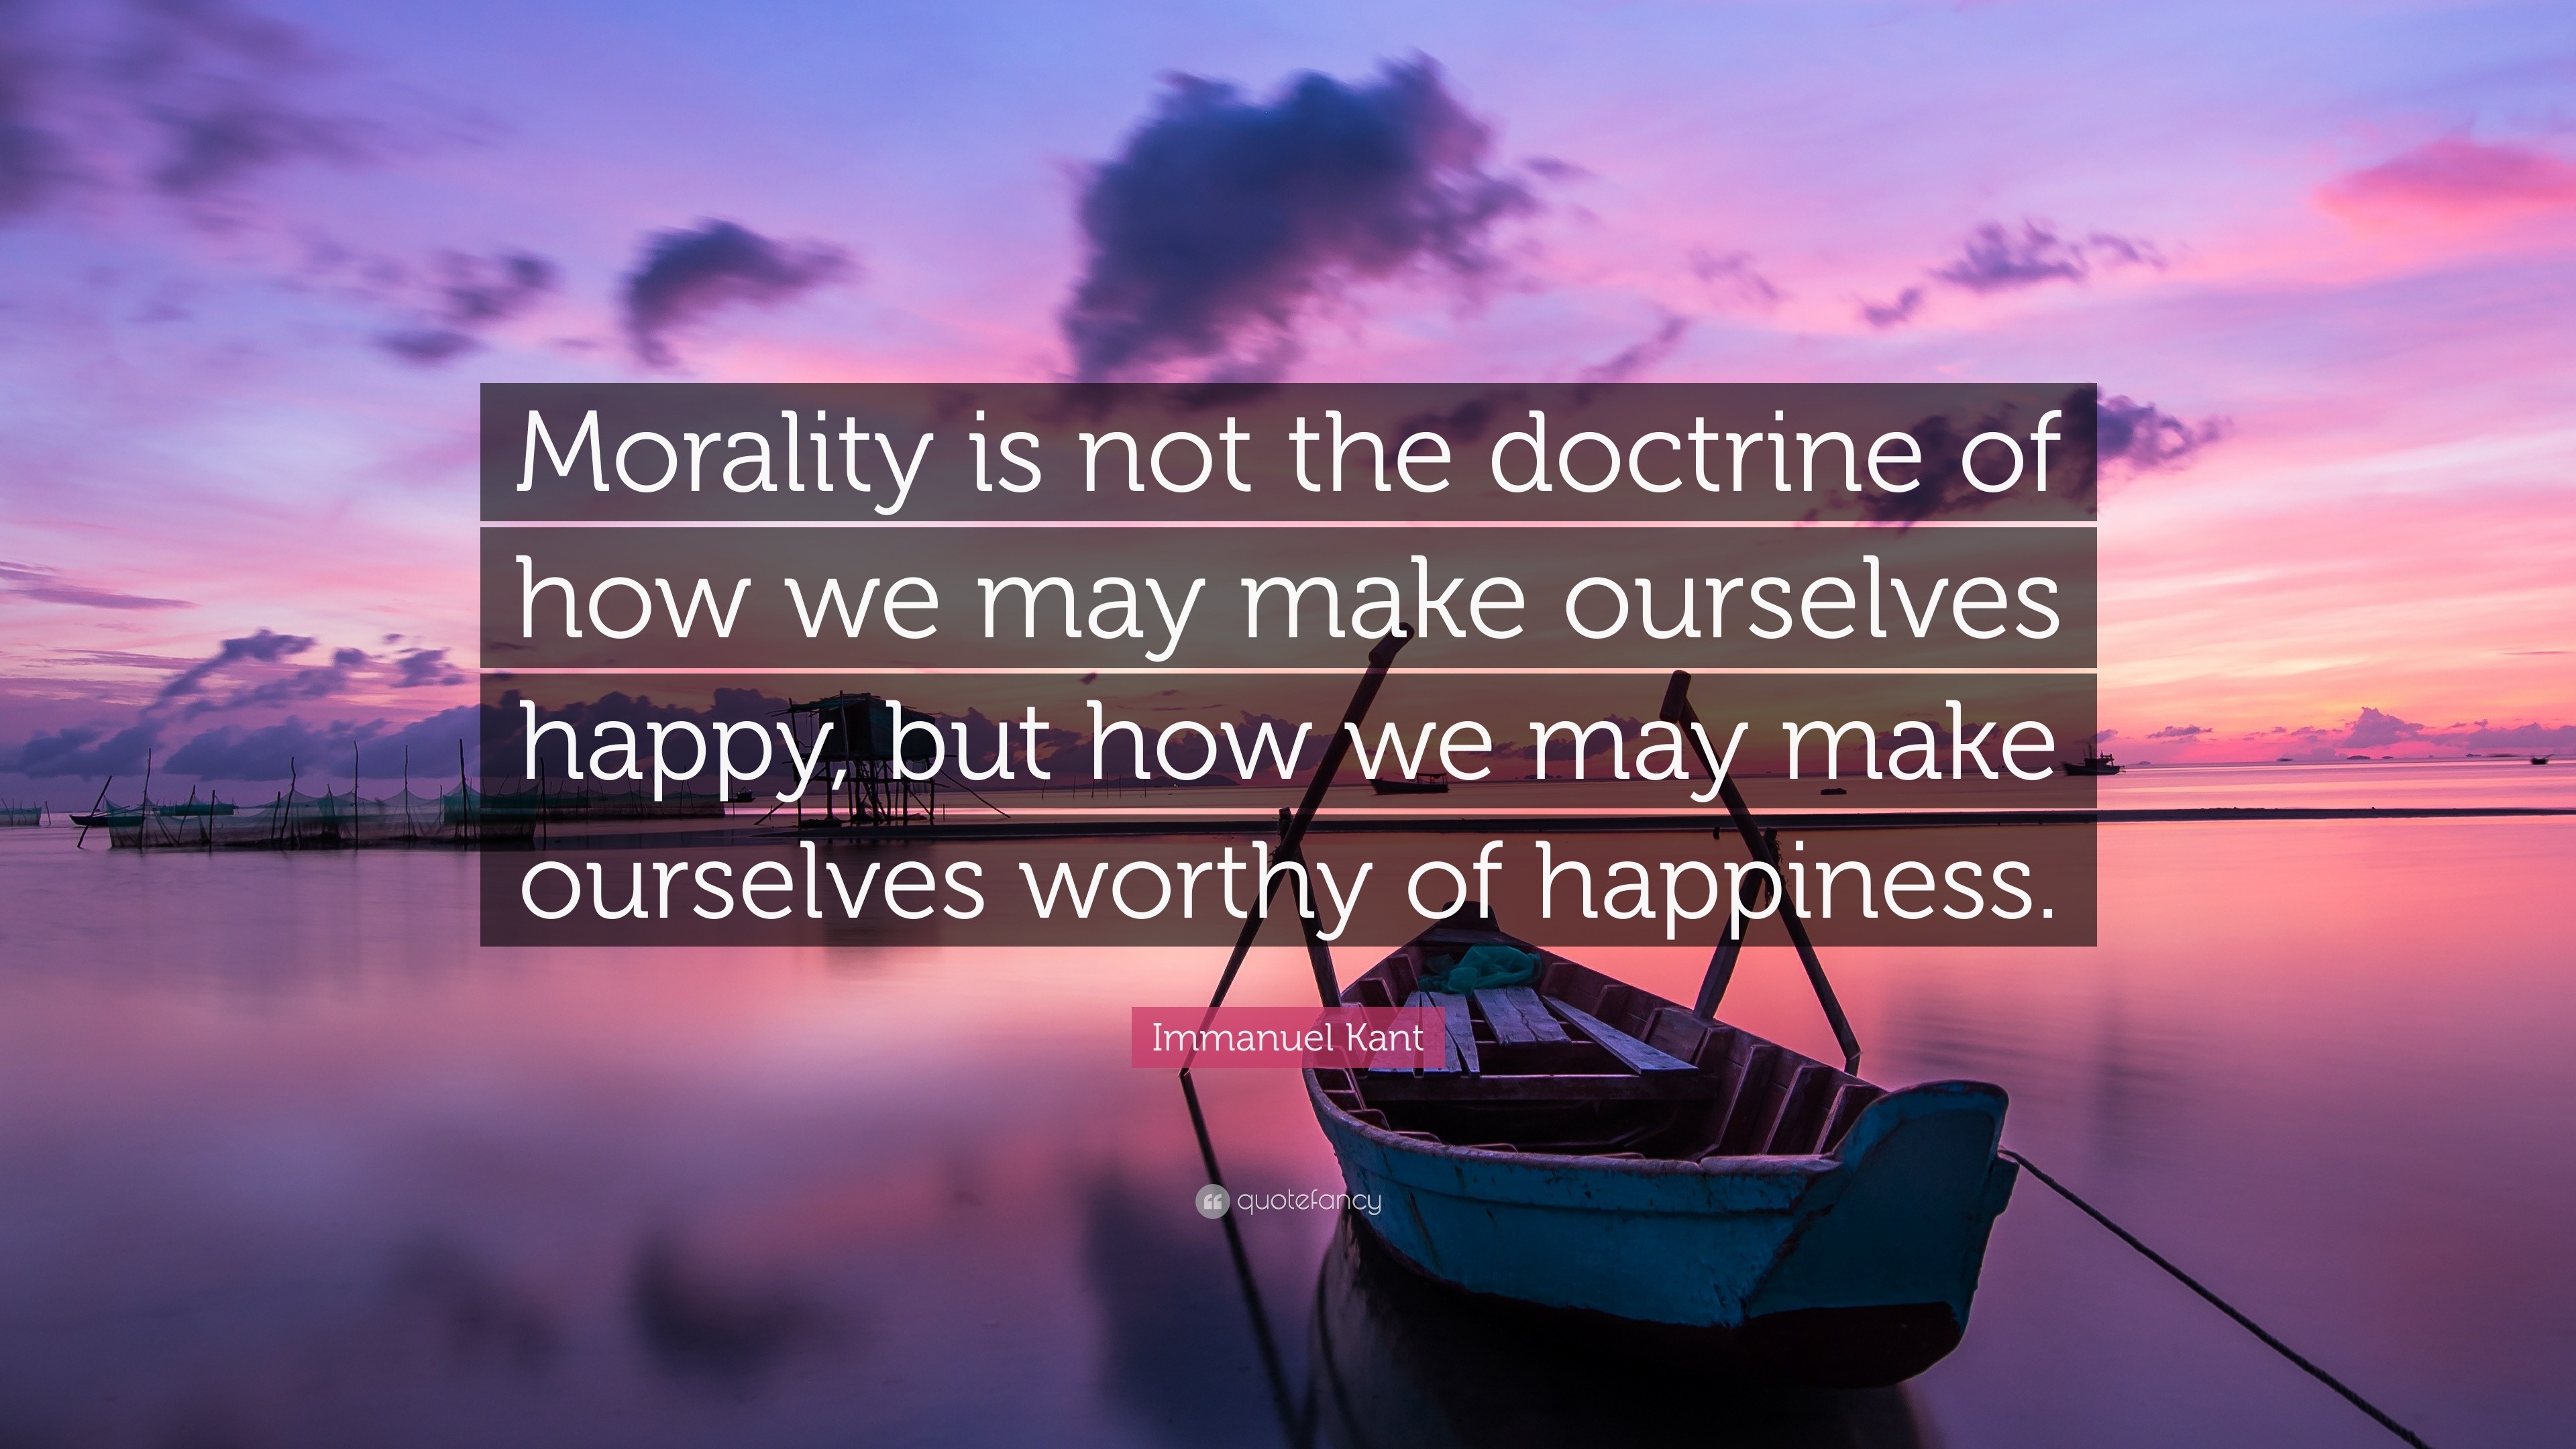 Immanuel Kant Quote “Morality is not the doctrine of how